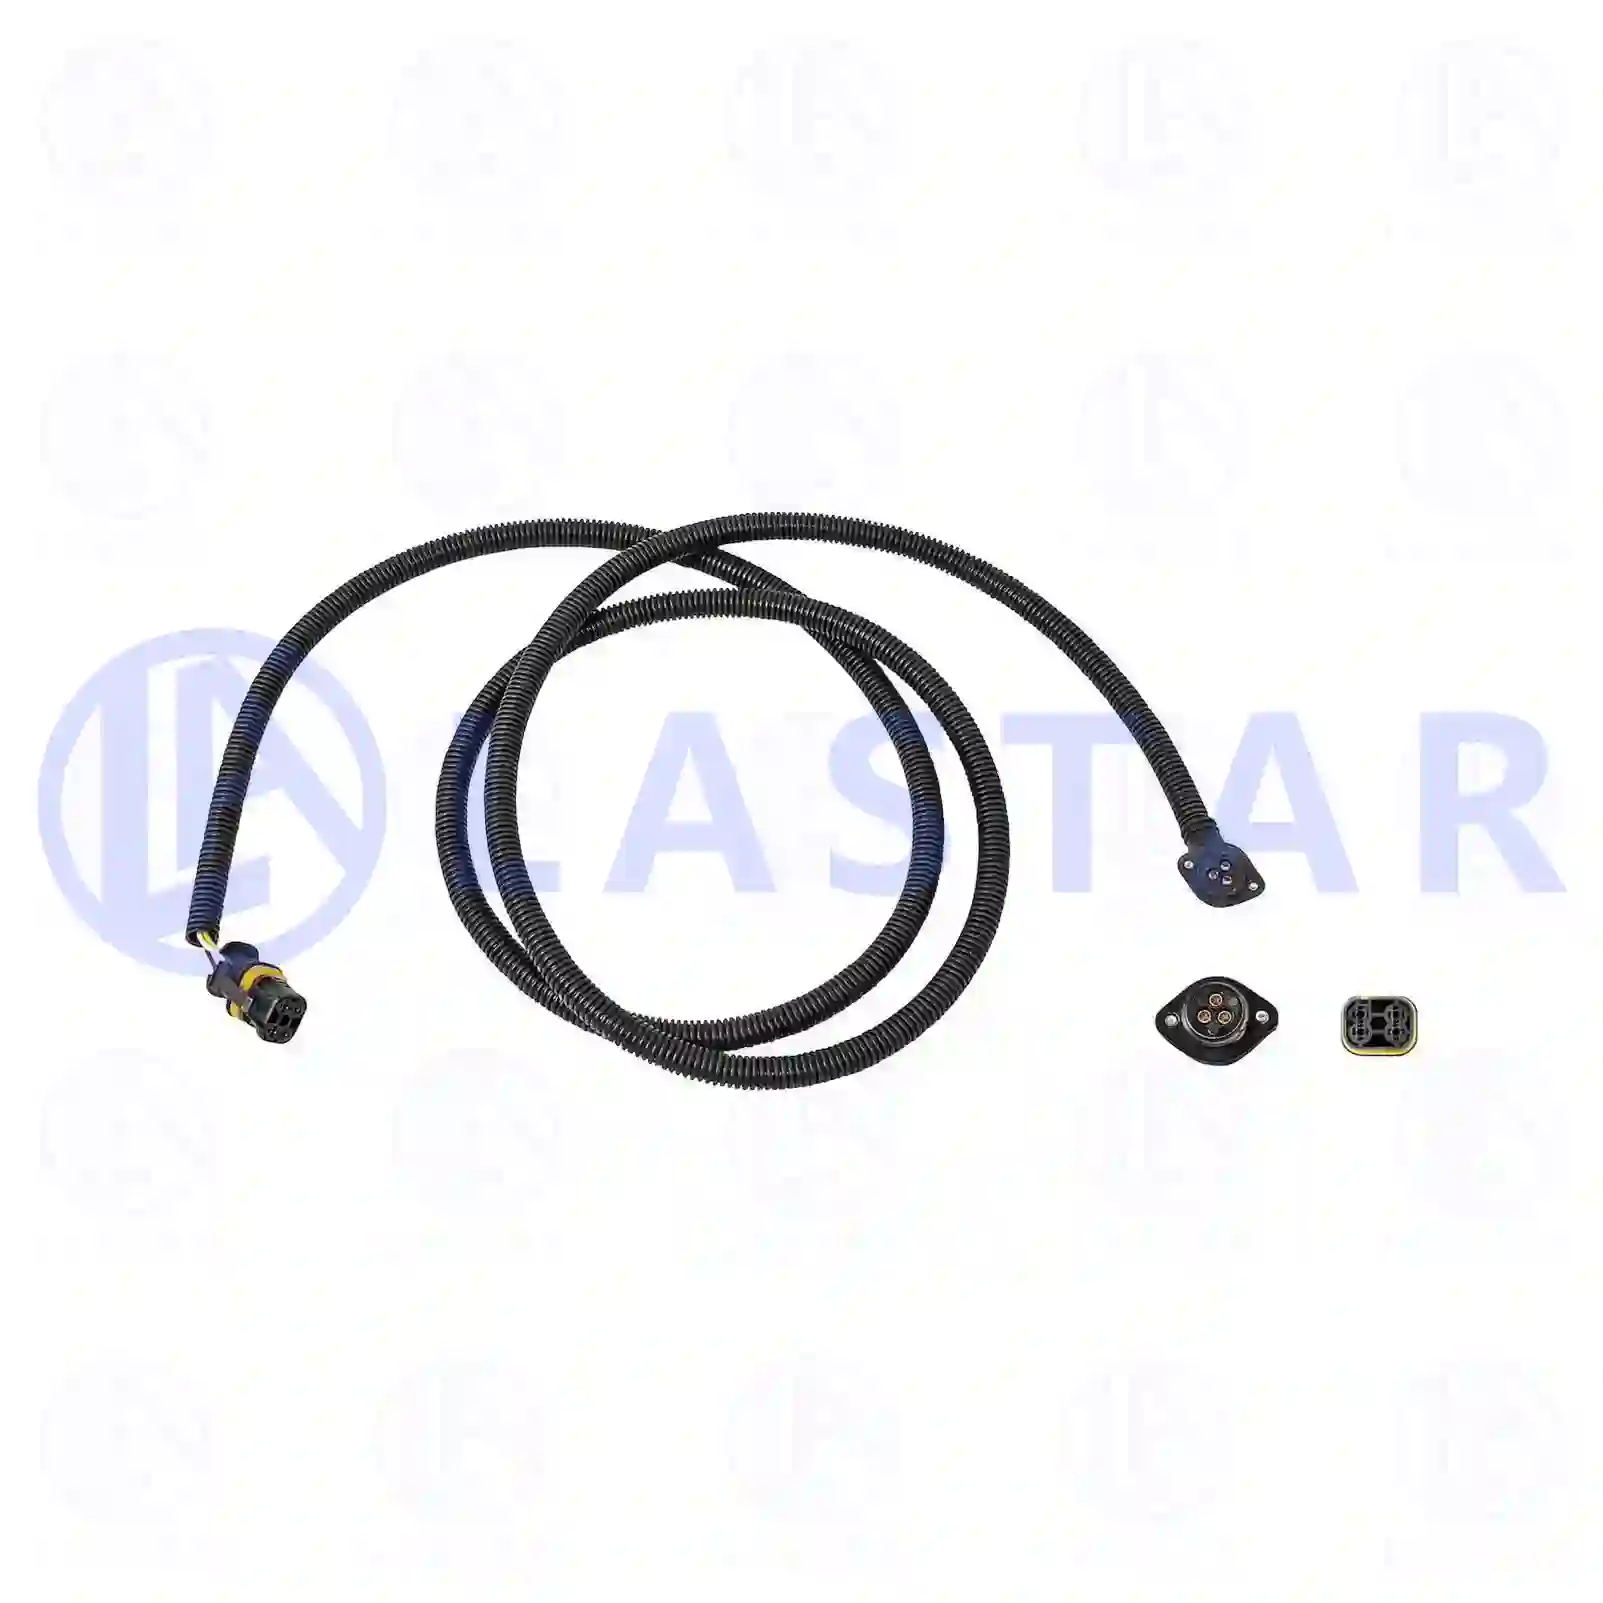 Cable harness, black, 77718000, 81254296893, 8125 ||  77718000 Lastar Spare Part | Truck Spare Parts, Auotomotive Spare Parts Cable harness, black, 77718000, 81254296893, 8125 ||  77718000 Lastar Spare Part | Truck Spare Parts, Auotomotive Spare Parts